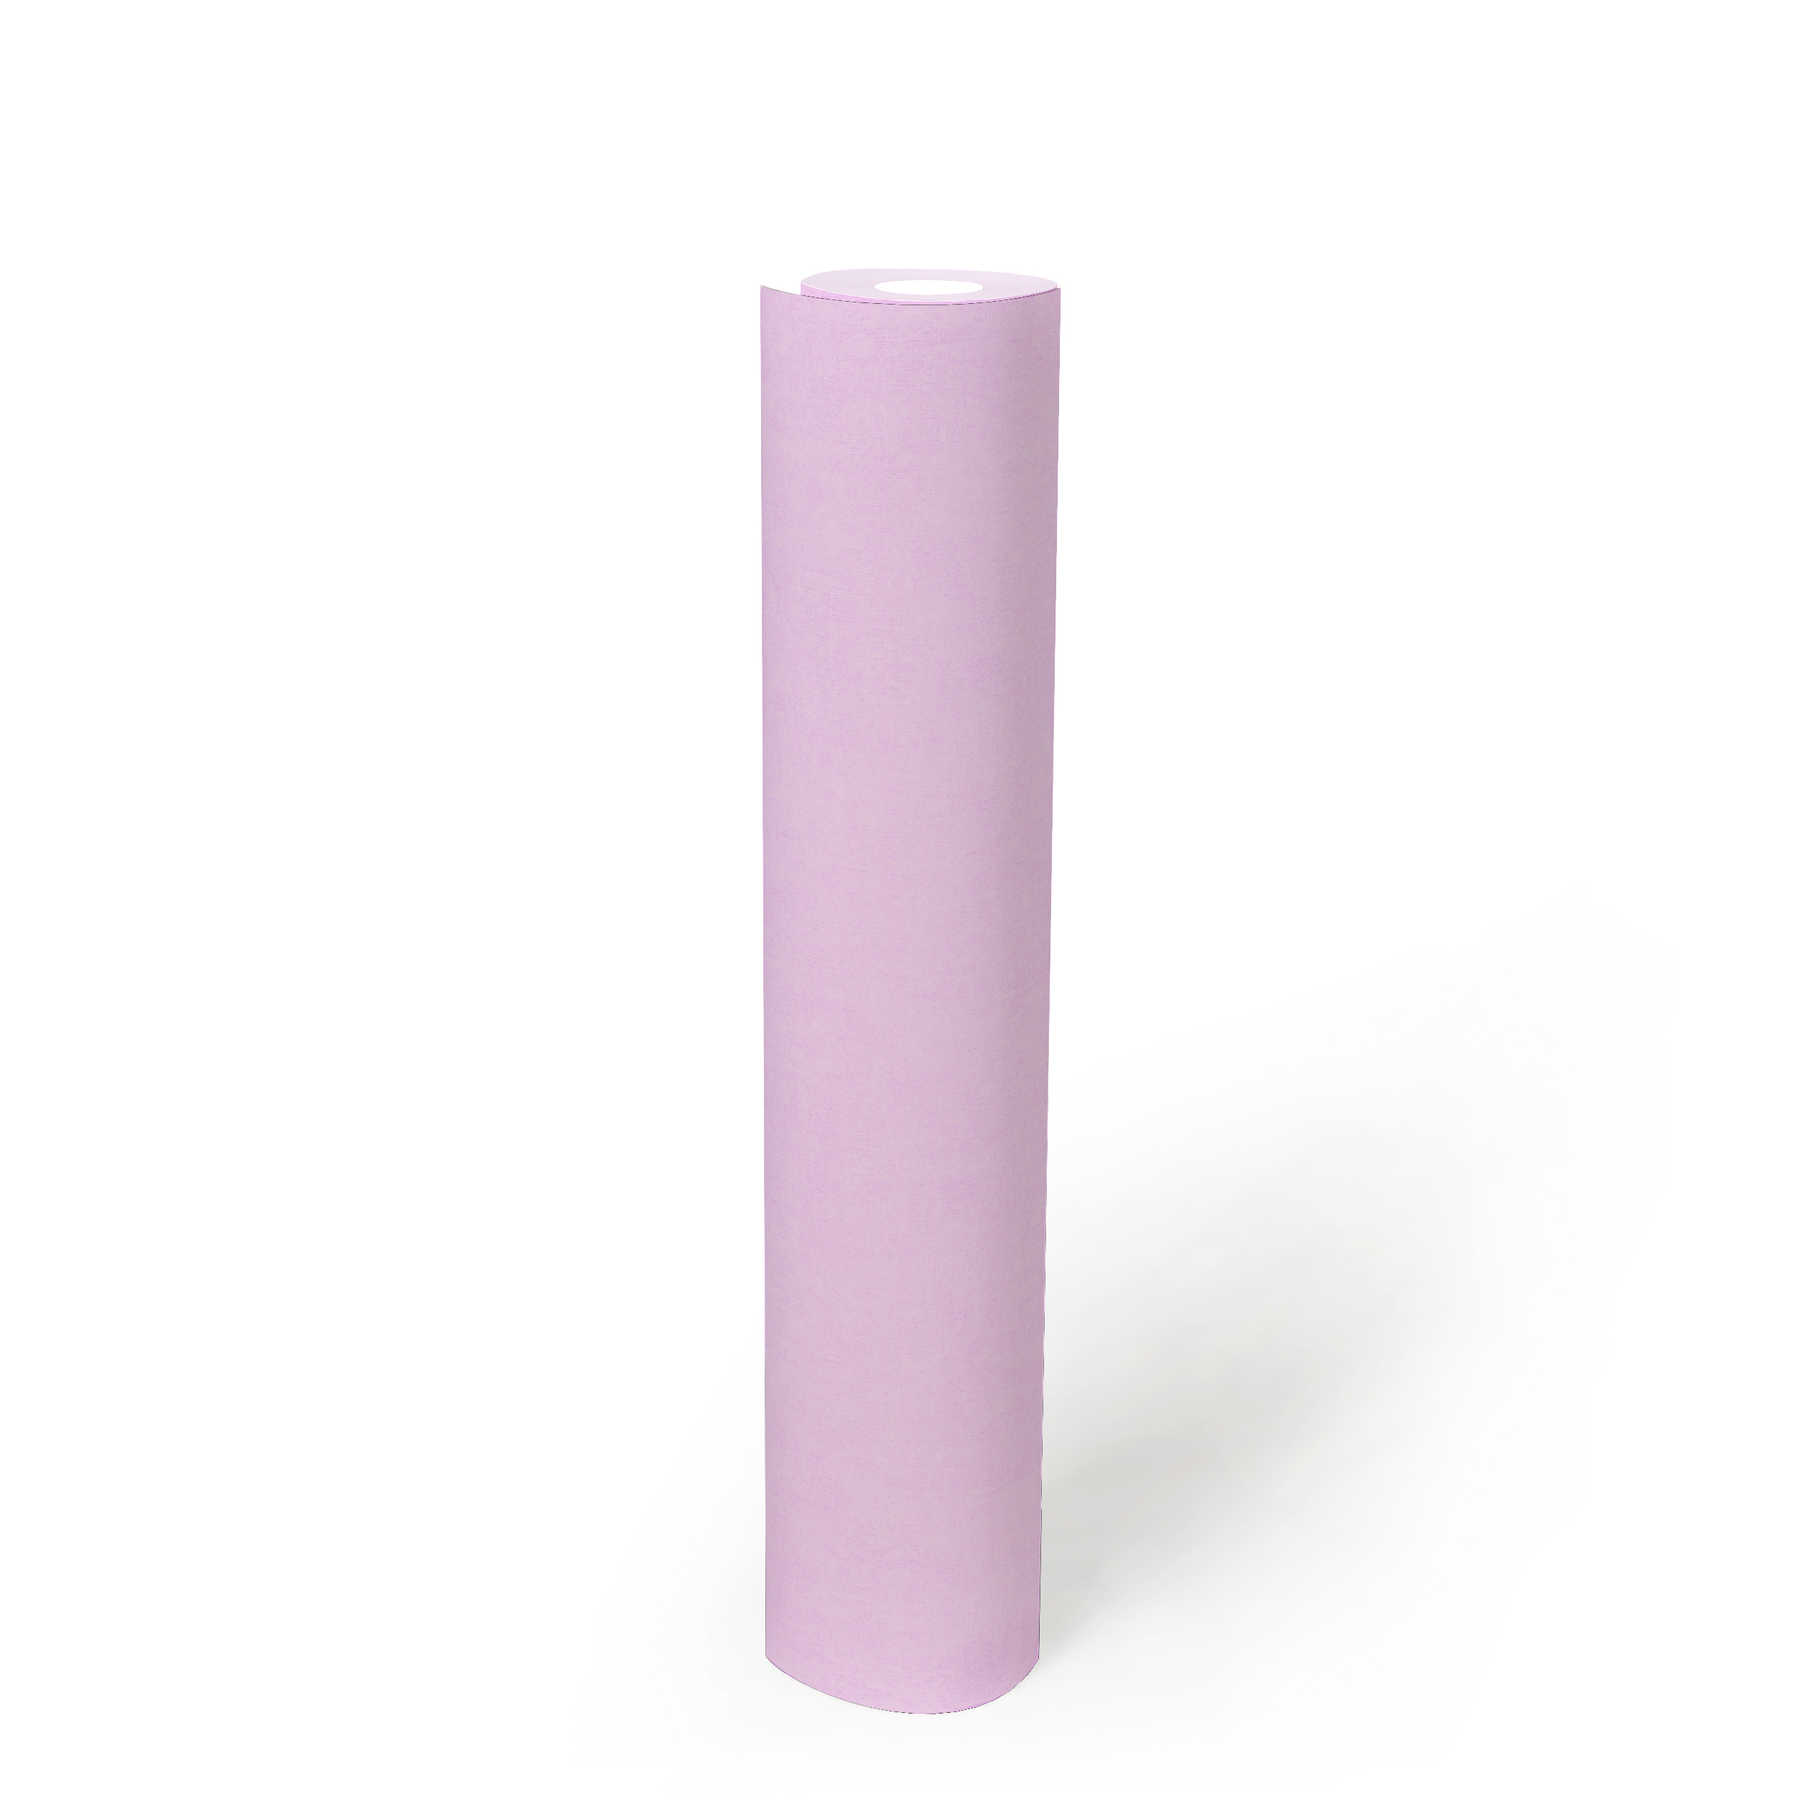             Pink non-woven wallpaper plain, pastel for Nursery - pink
        